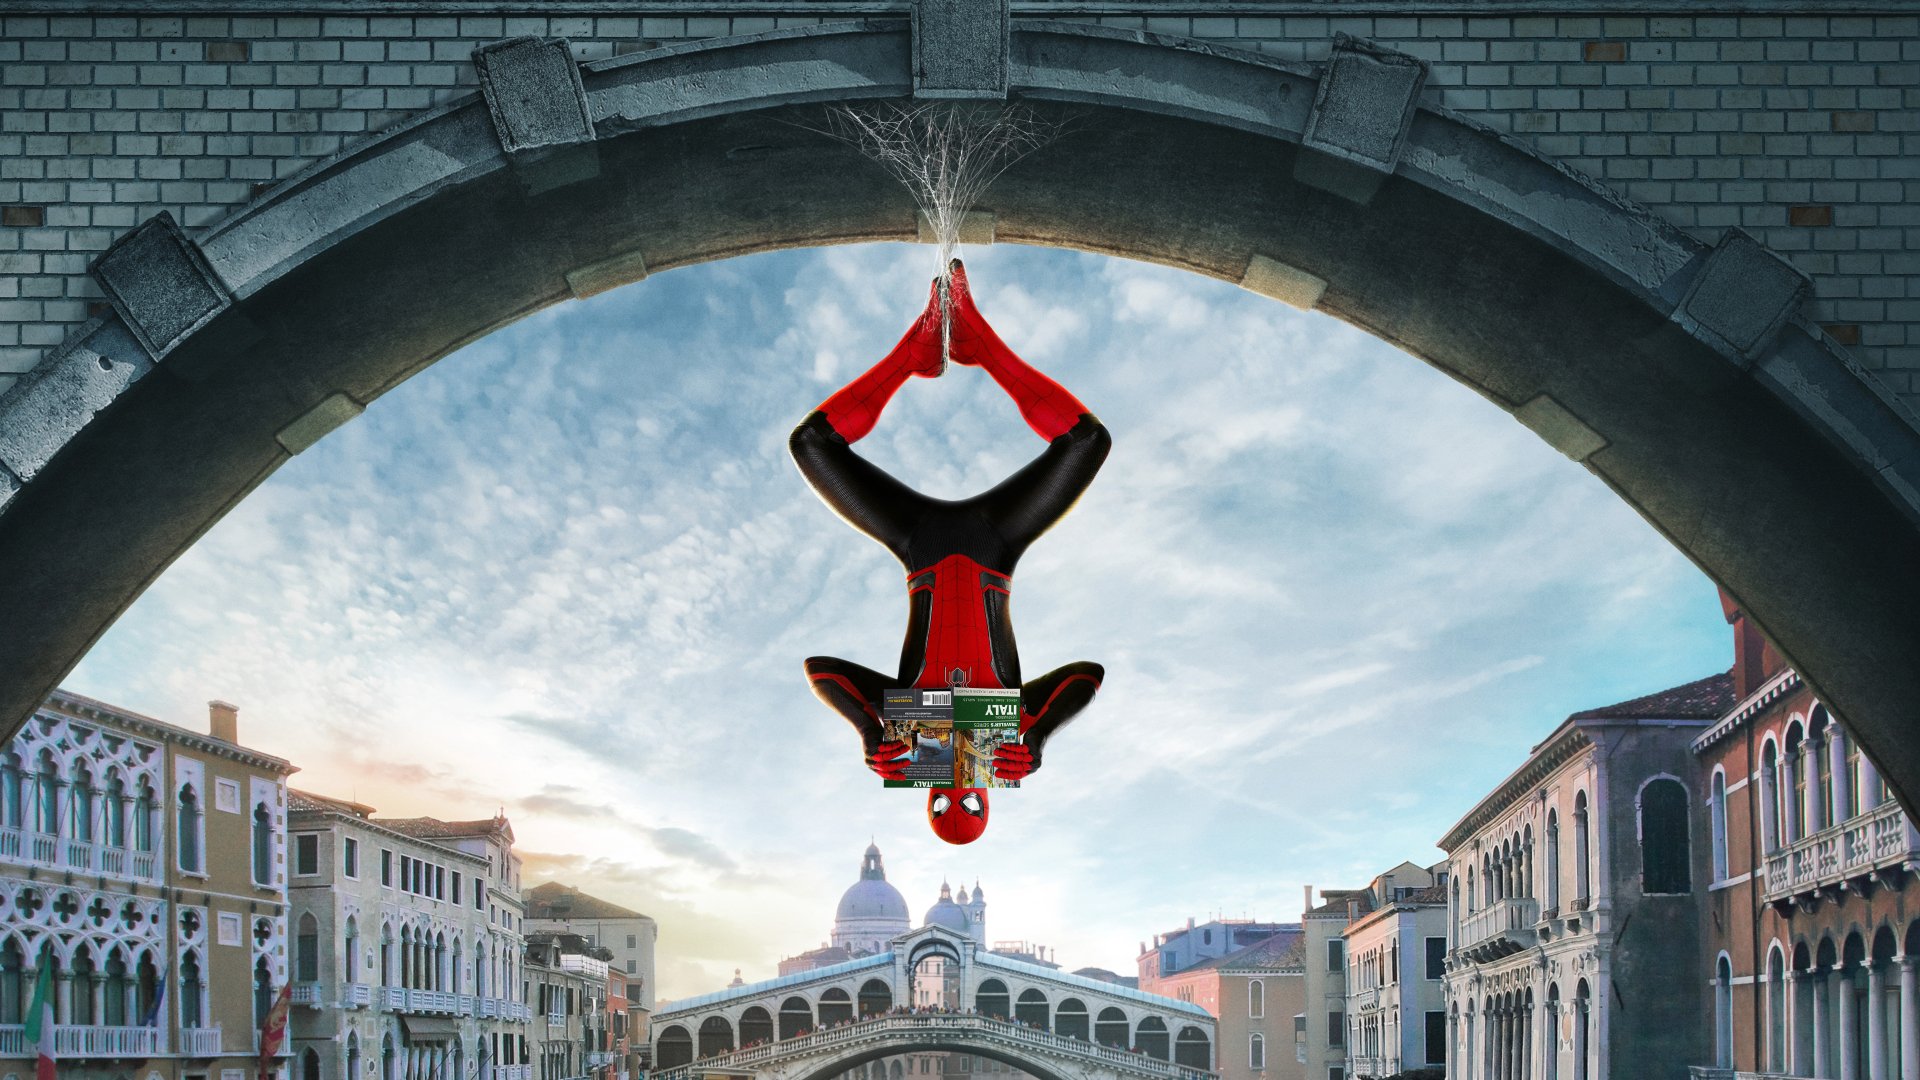 Spider-Man: Far From Home download the new version for mac